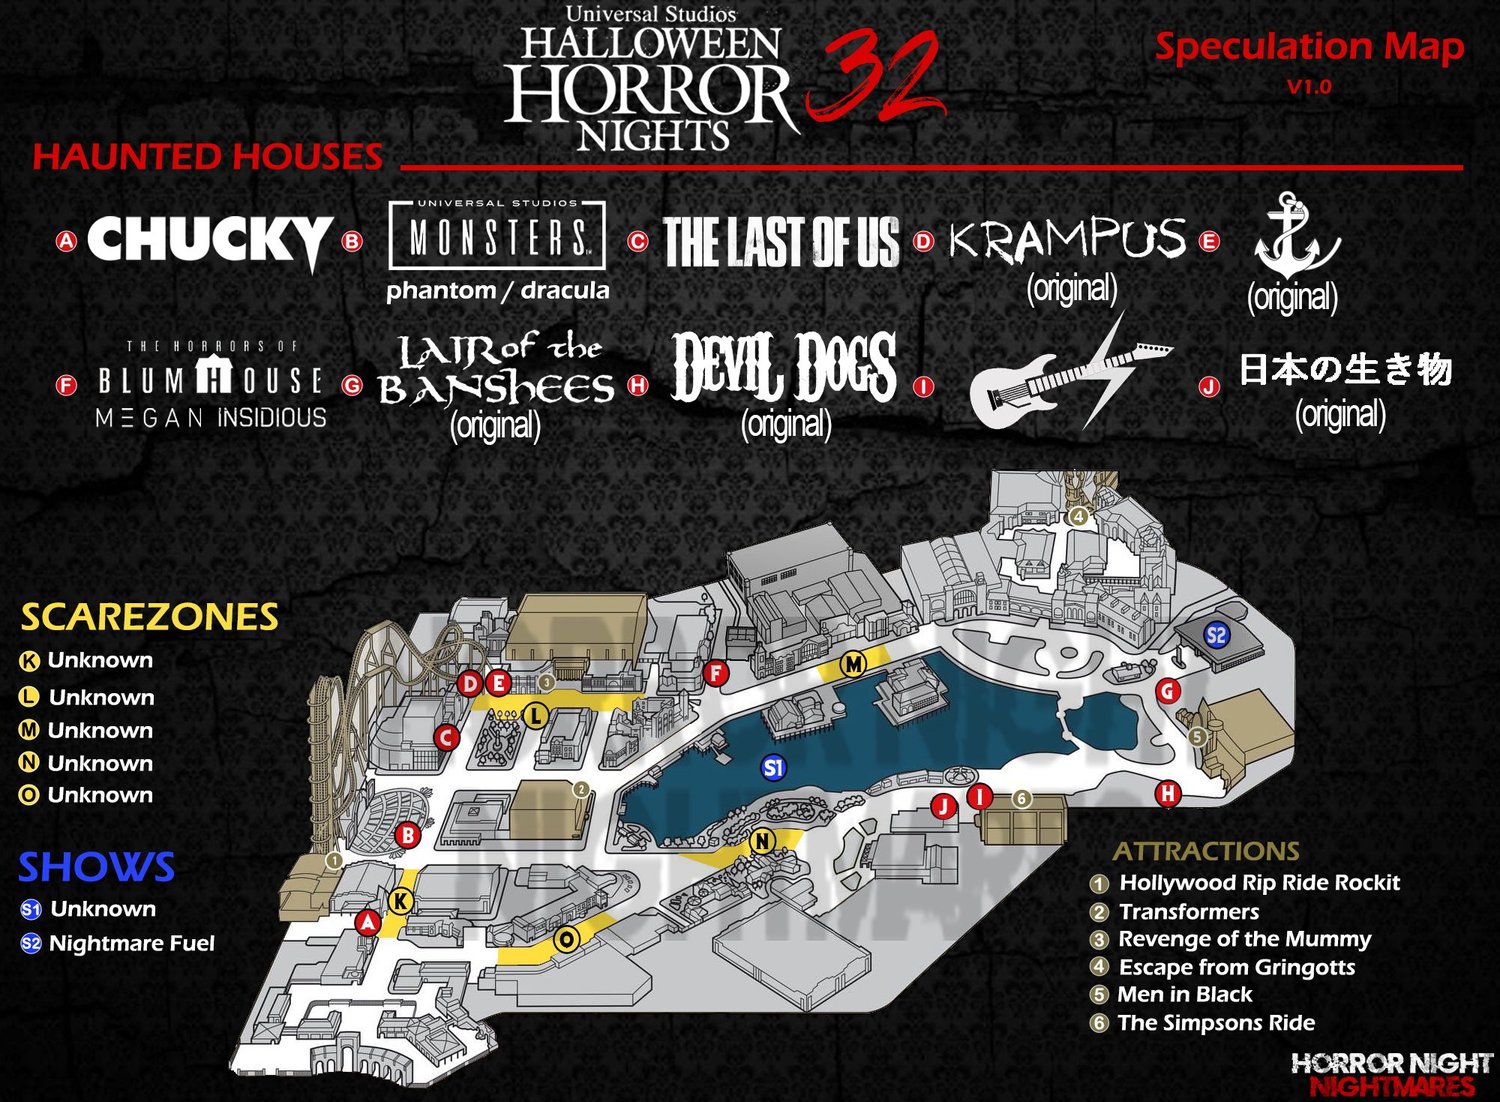 Halloween Horror Nights 2023 Speculation Map Arrives! The Drop Network